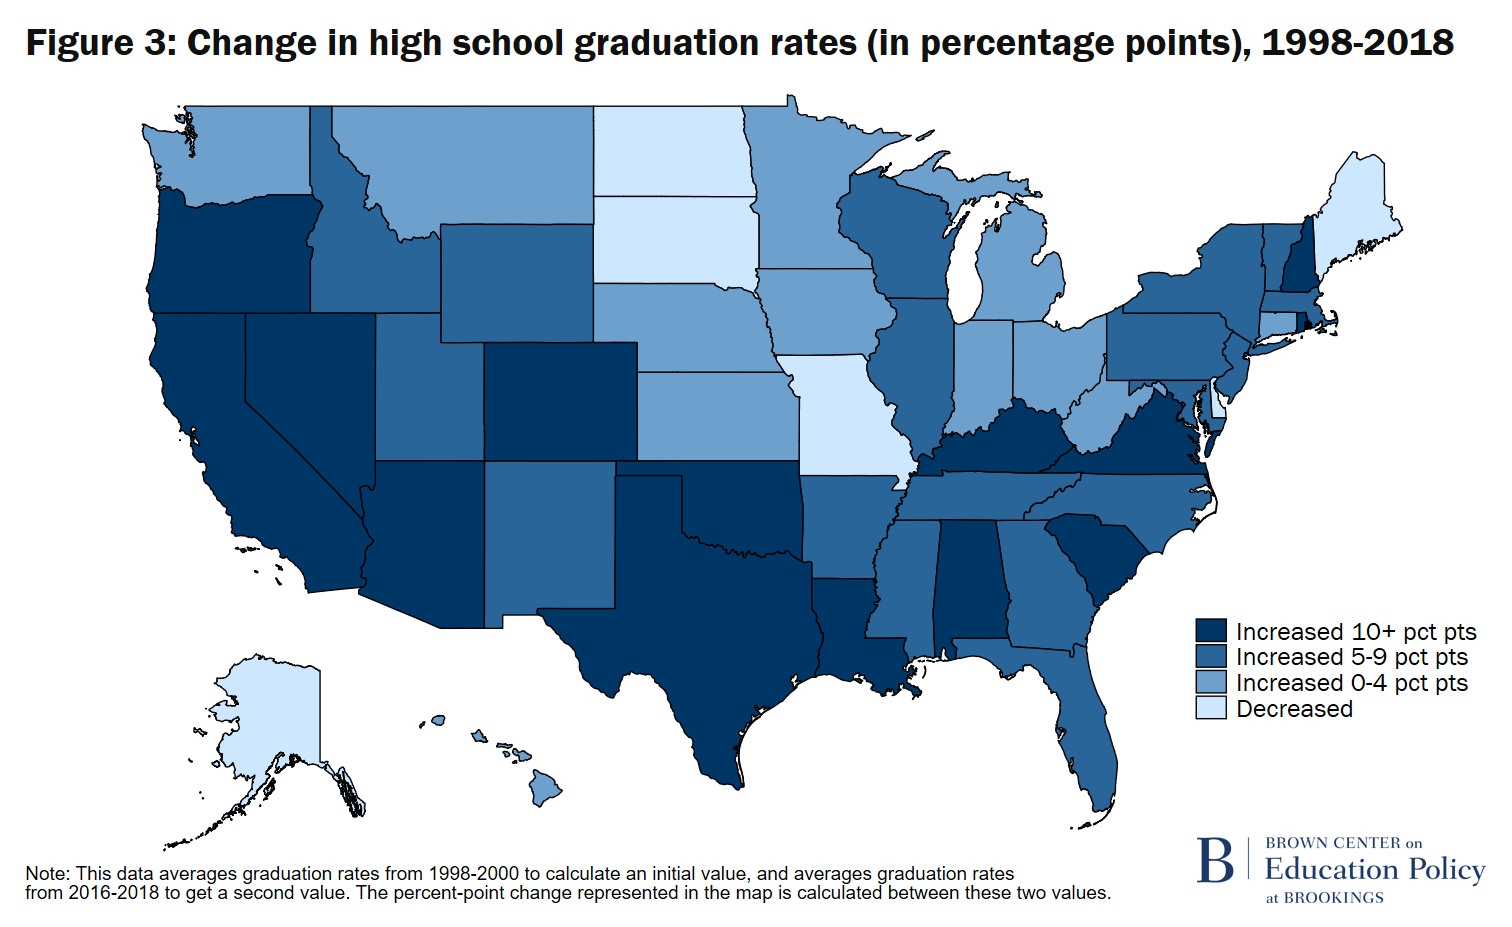 Are Americas Rising High School Graduation Rates Real—or Just An